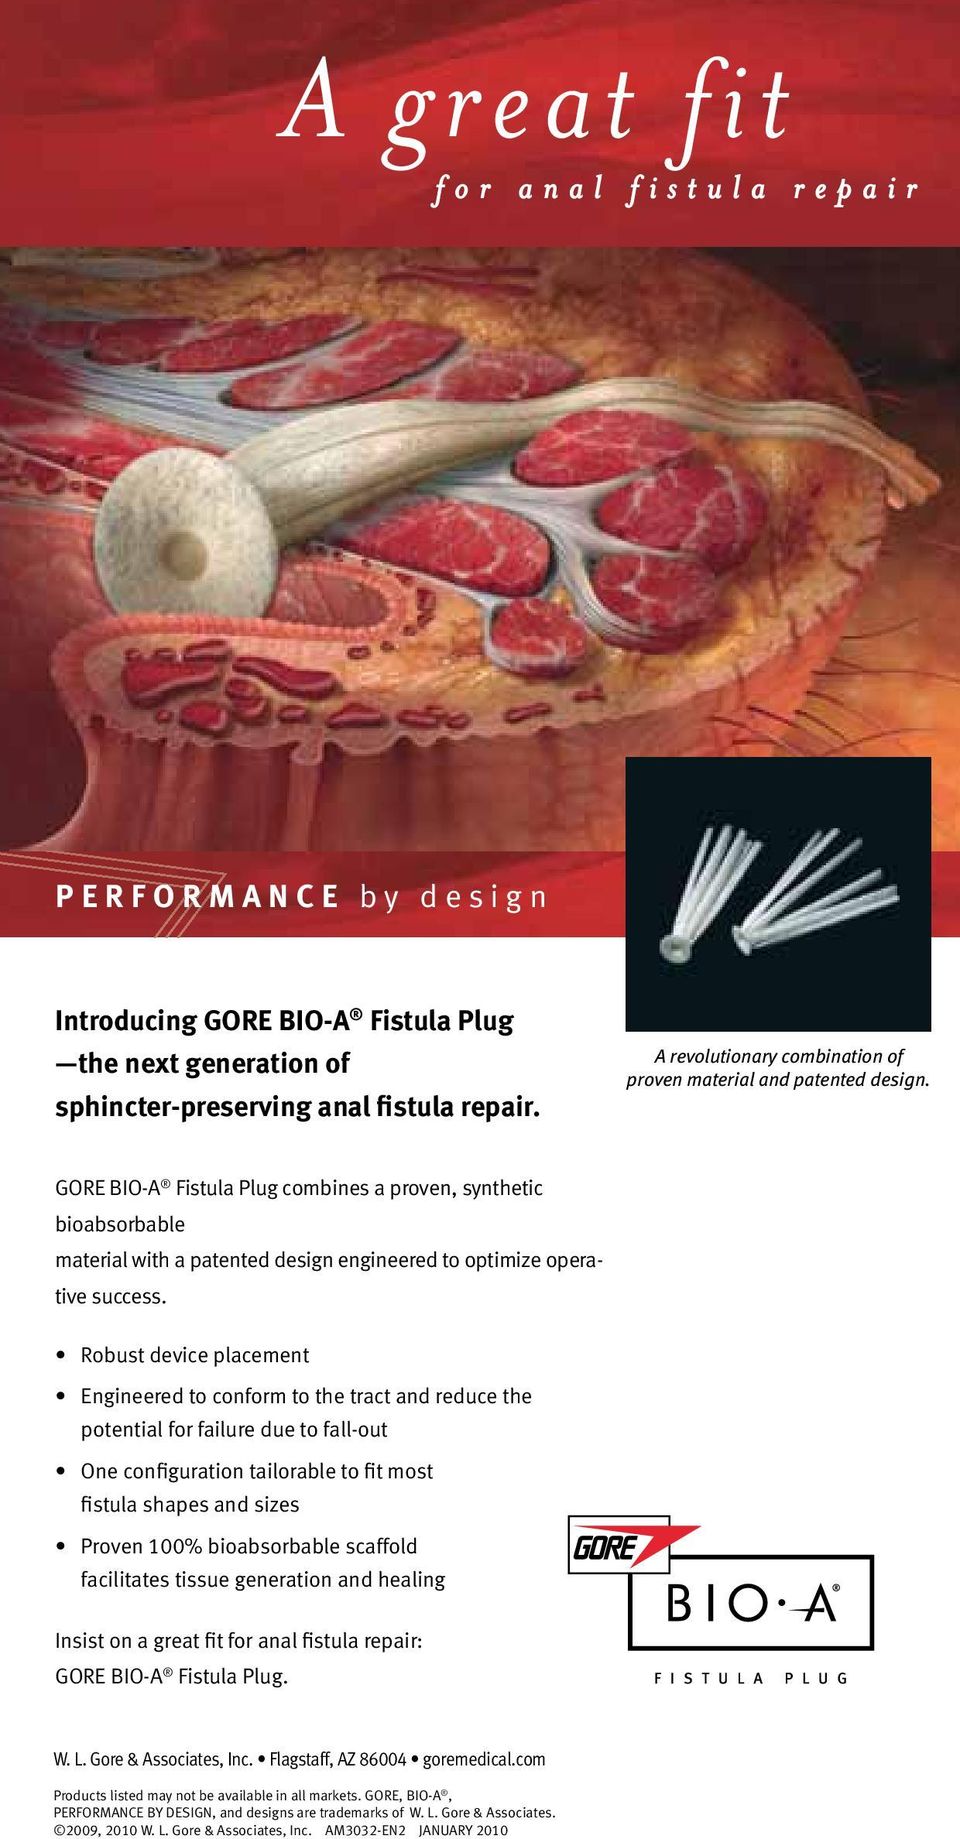 GORE BIO-A Fistula Plug combines a proven, synthetic bioabsorbable material with a patented design engineered to optimize operative success.